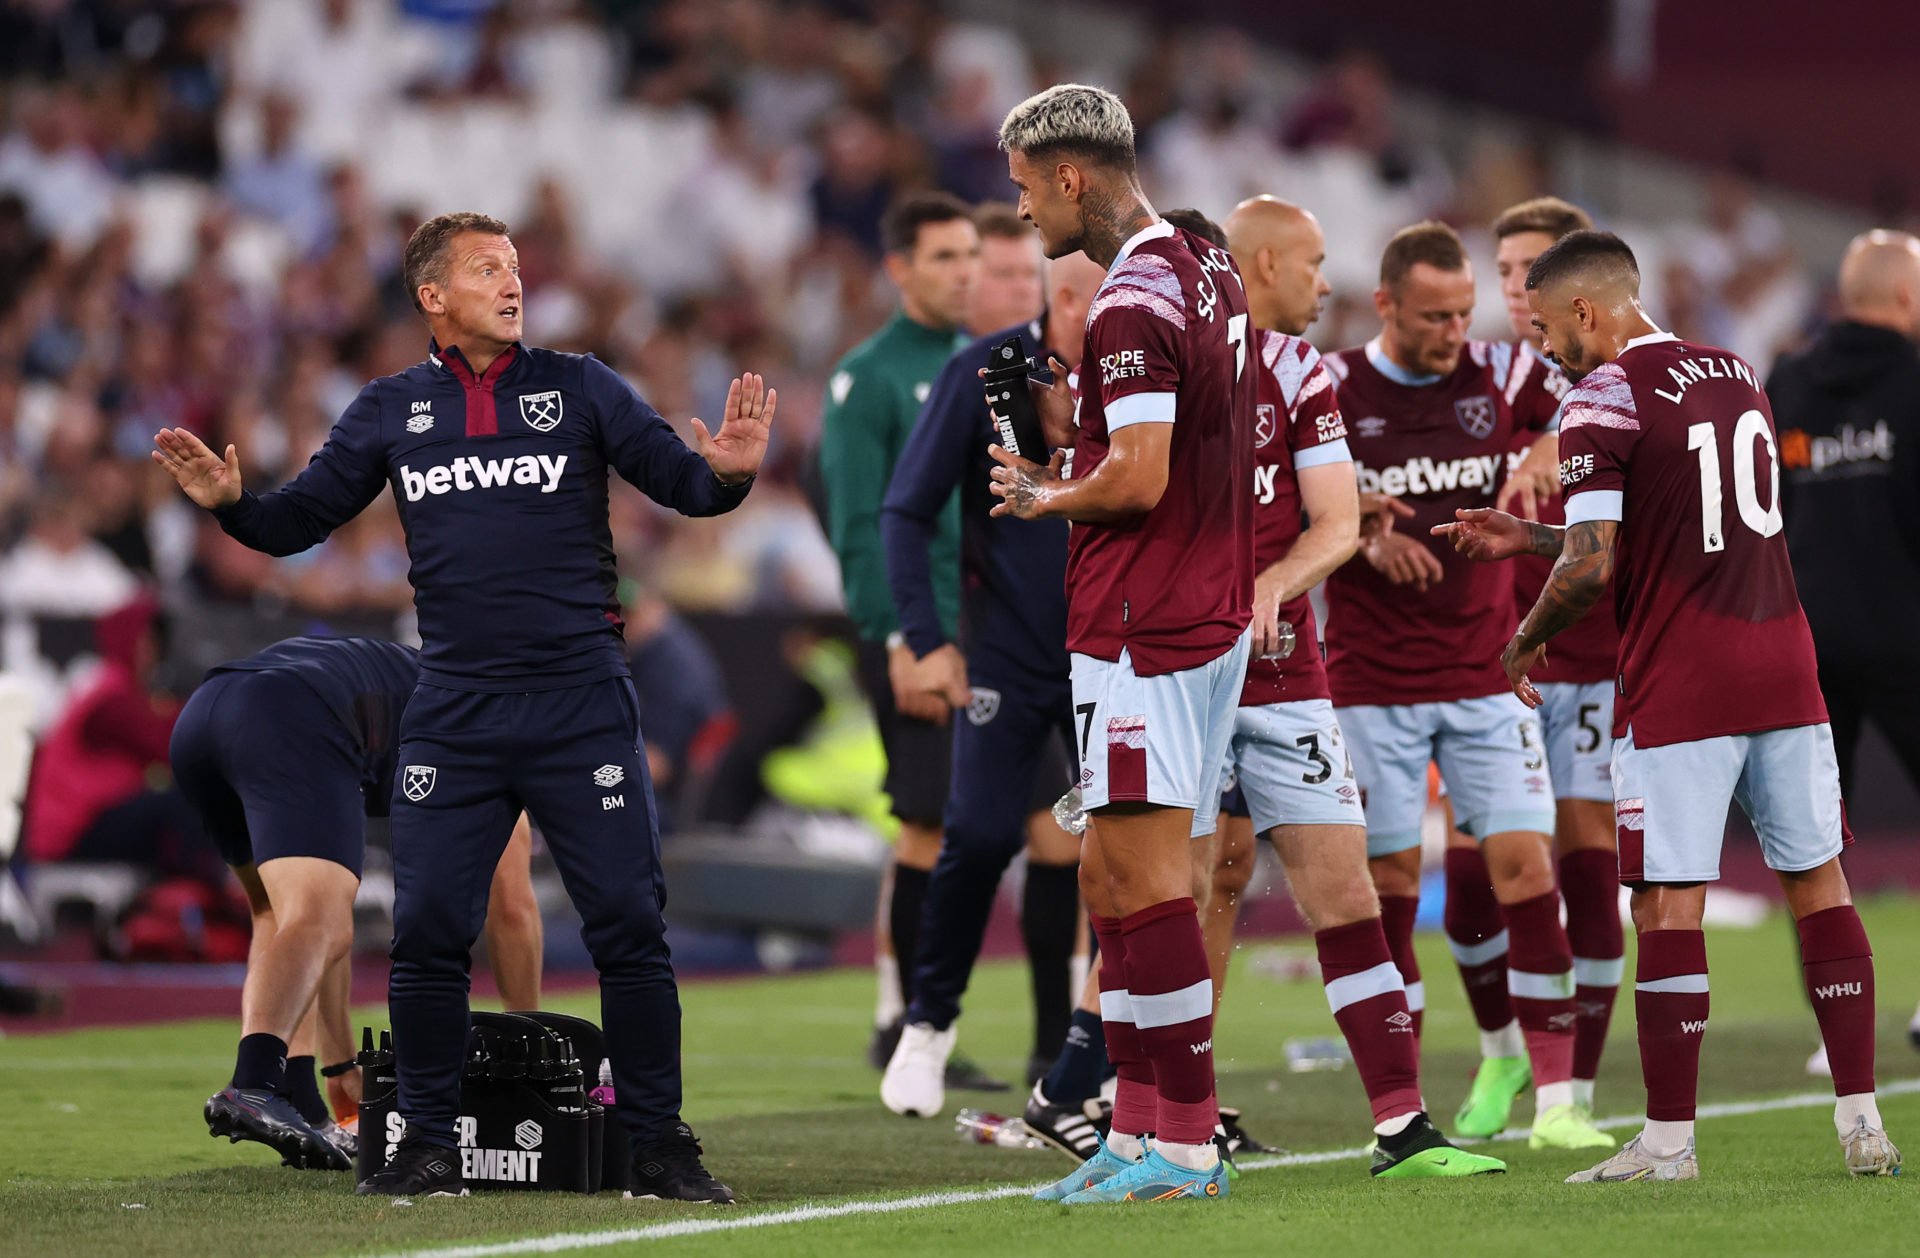 Billy McKinlay has raved about the performance of Said Benrahma for West Ham against Viborg